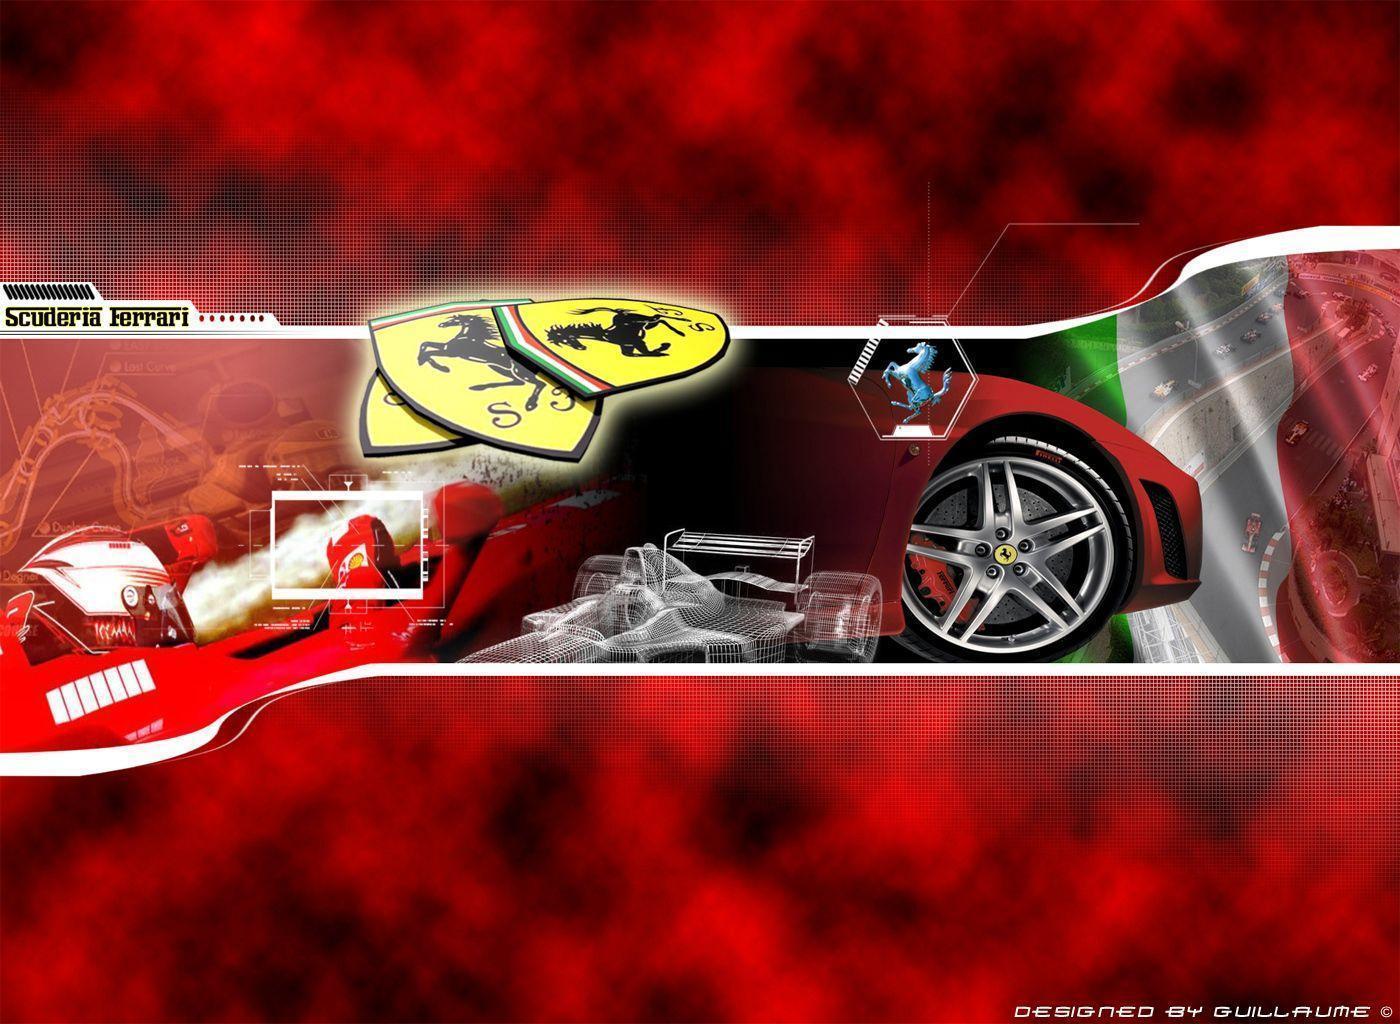 Scuderia Ferrari Wallpaper  Download to your mobile from PHONEKY